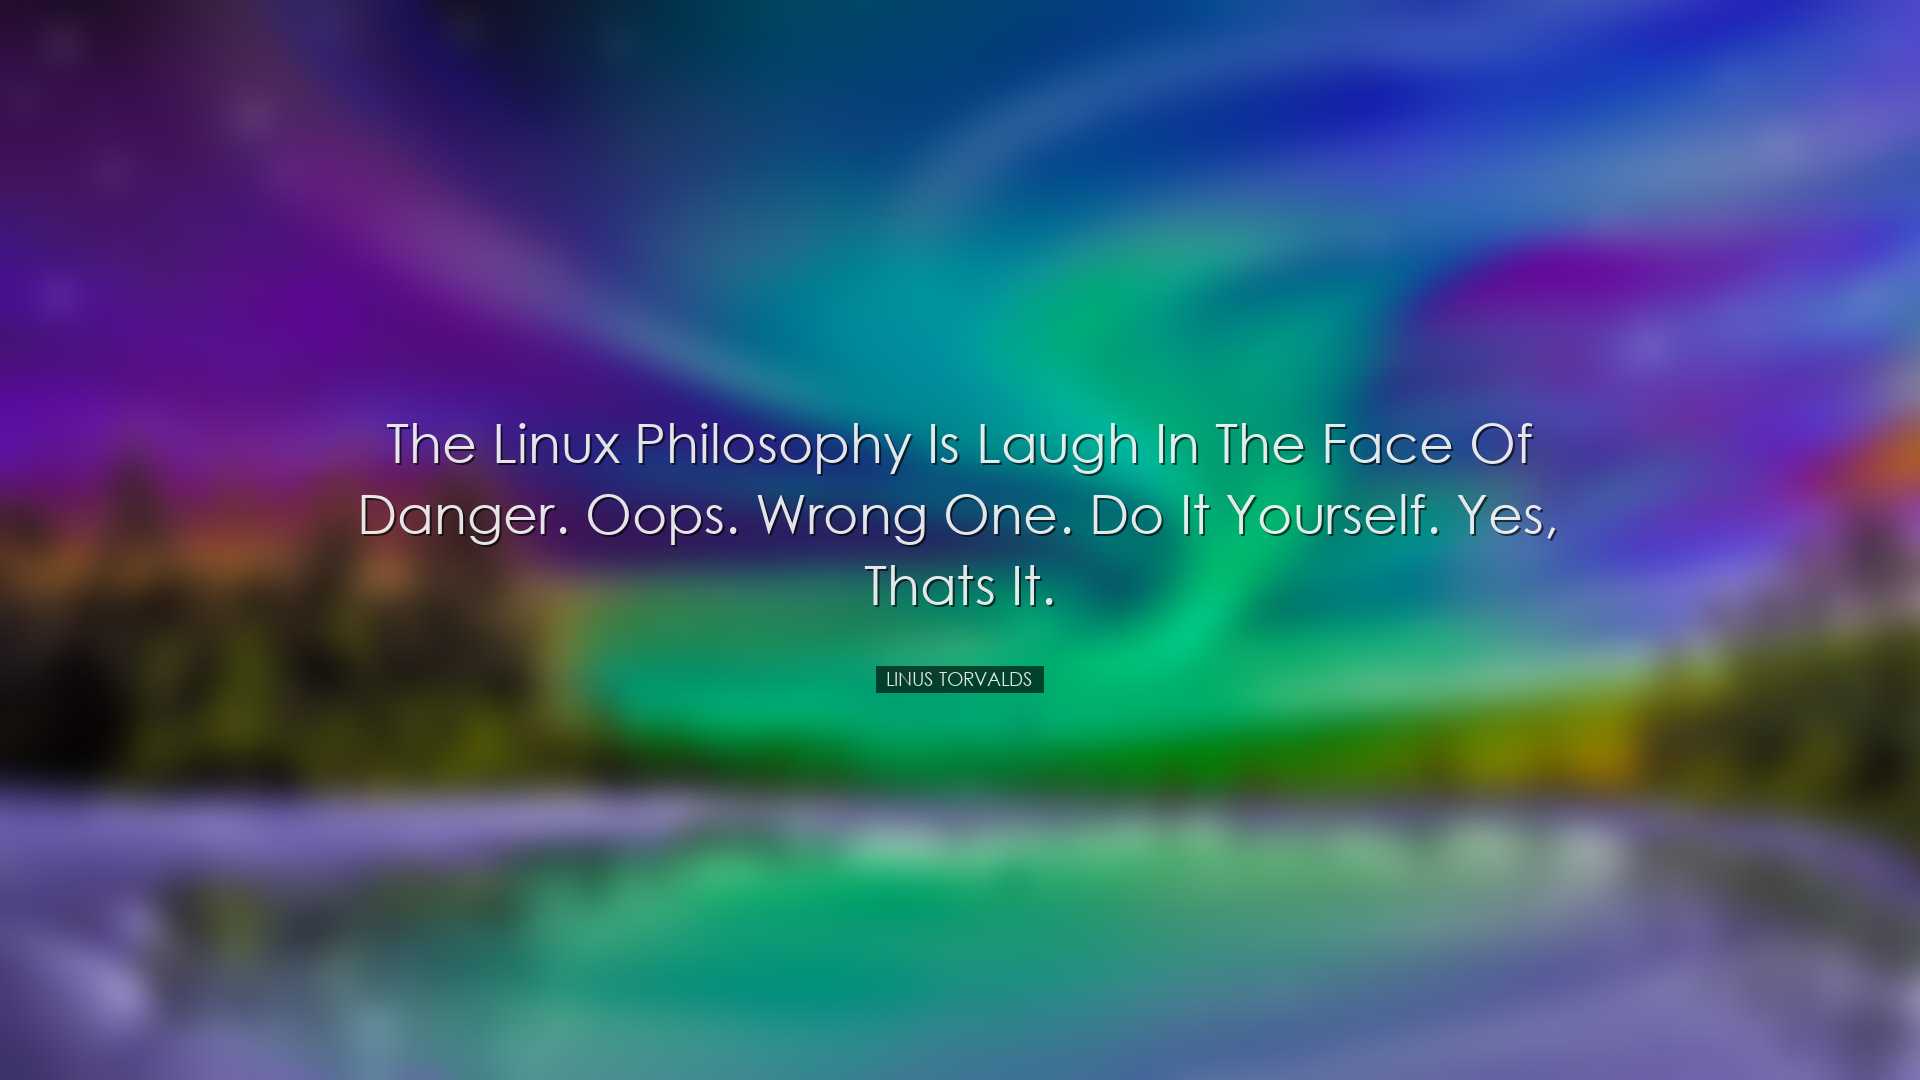 The Linux philosophy is Laugh in the face of danger. Oops. Wrong O